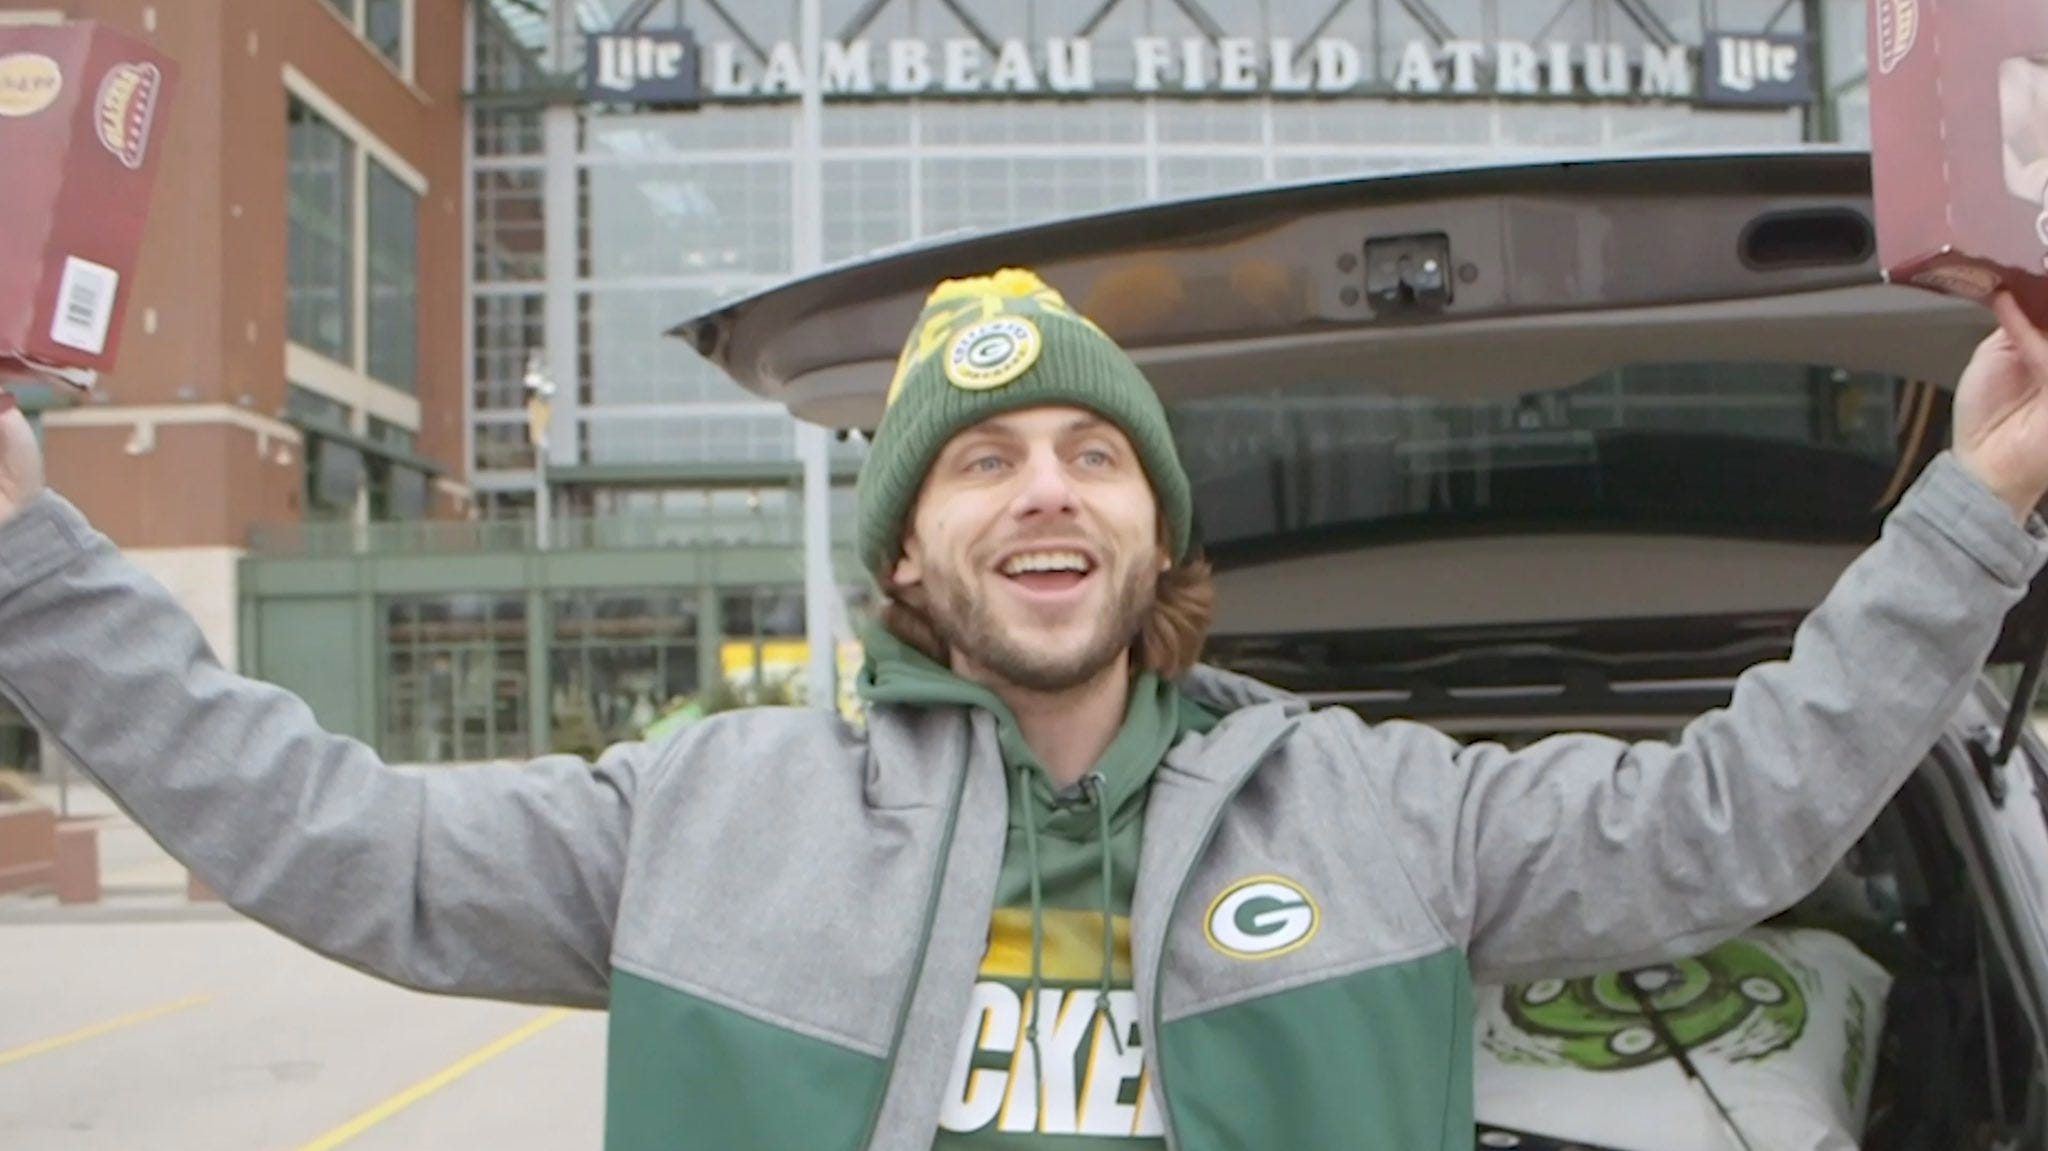 Charlie Berens makes Packers fans laugh, cry with 'Missing Lambeau' video